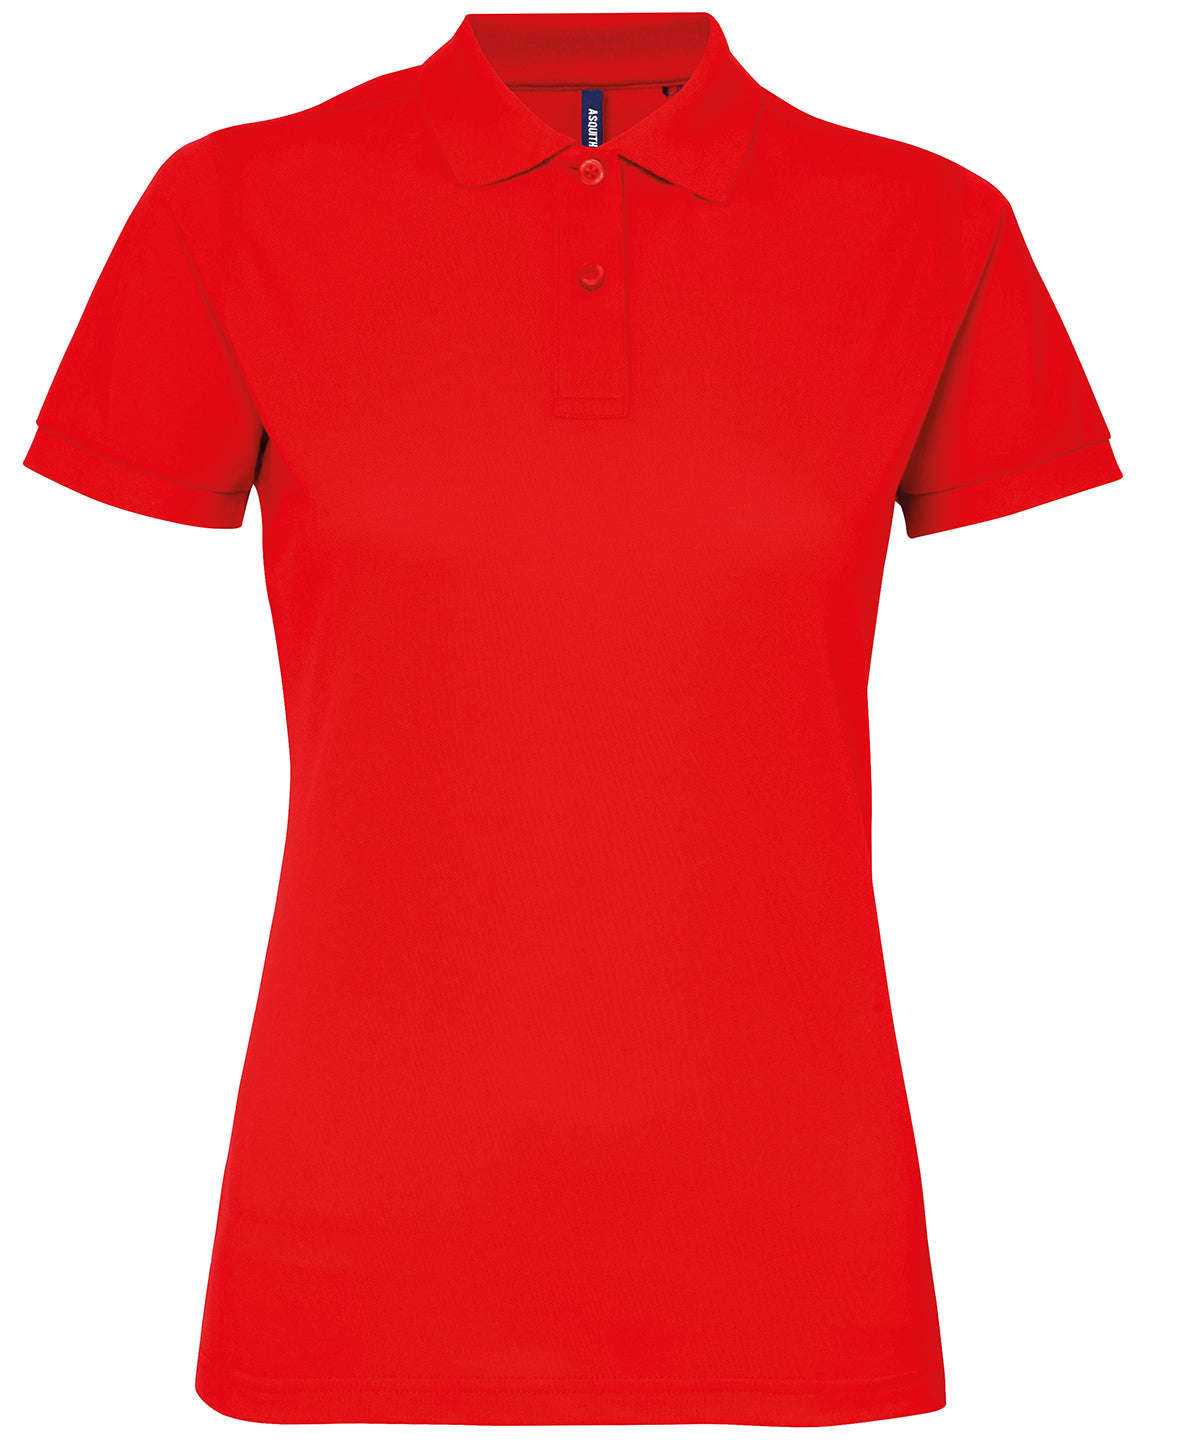 Personalised Polo Shirts - Burgundy Asquith & Fox Women’s polycotton blend polo